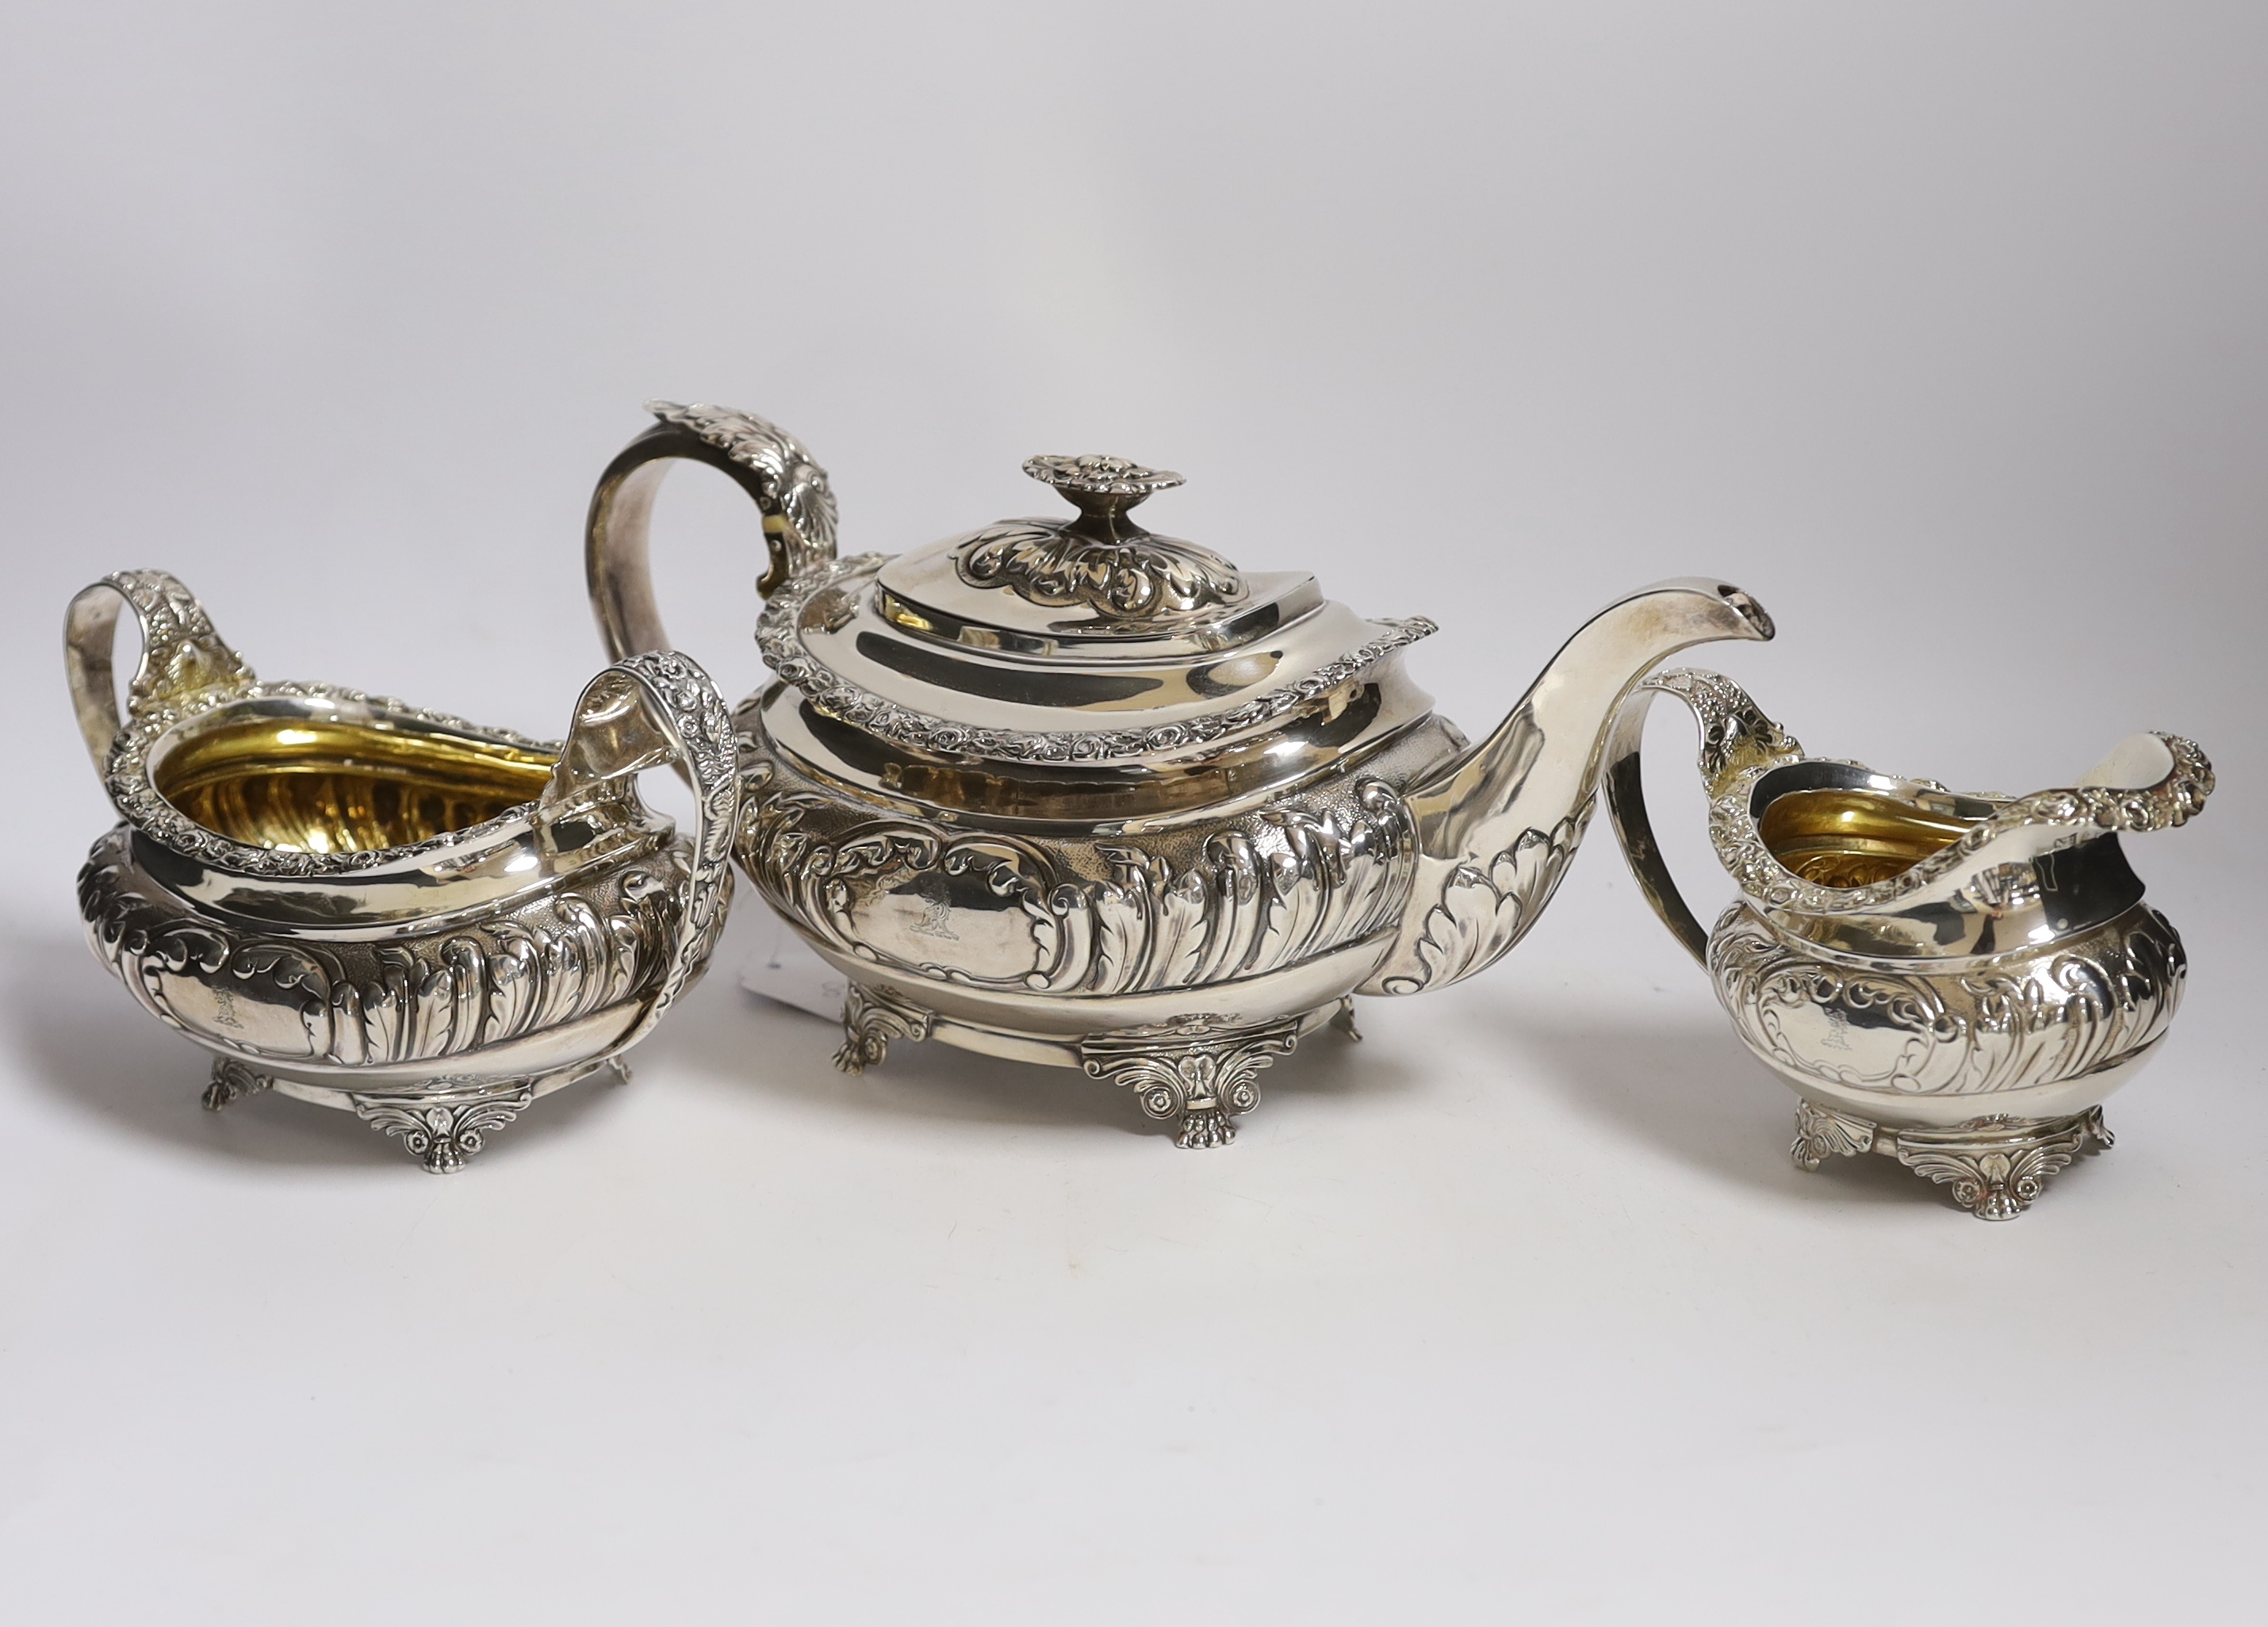 A George IV silver three piece oval tea set, on winged paw feet, by Naphtali Hart, London 1820, gross weight 39.4oz. CITES Submission reference WPRX4YEC                                                                    